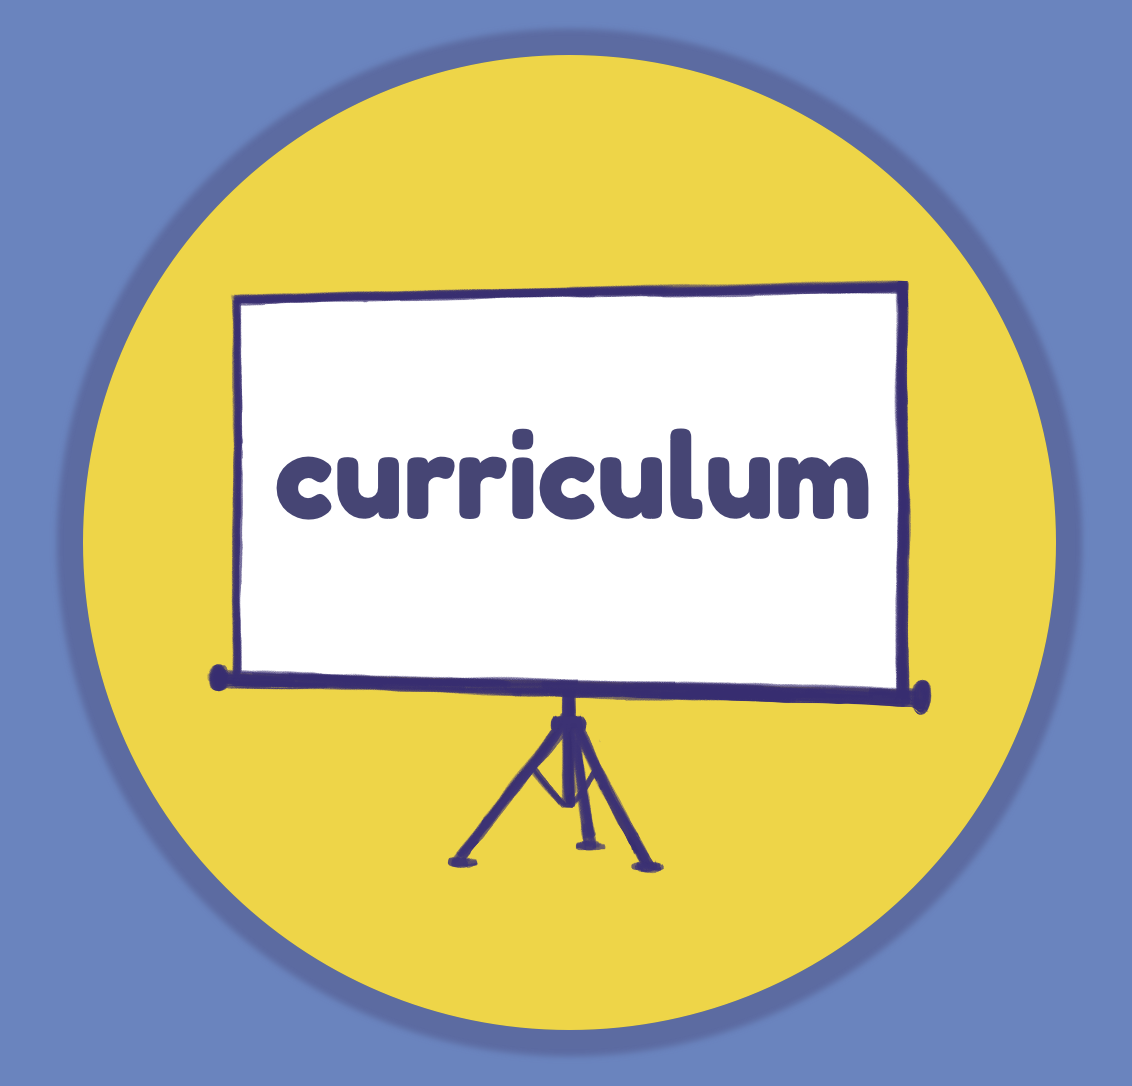 Curriculum - Ding's Learning Design Library